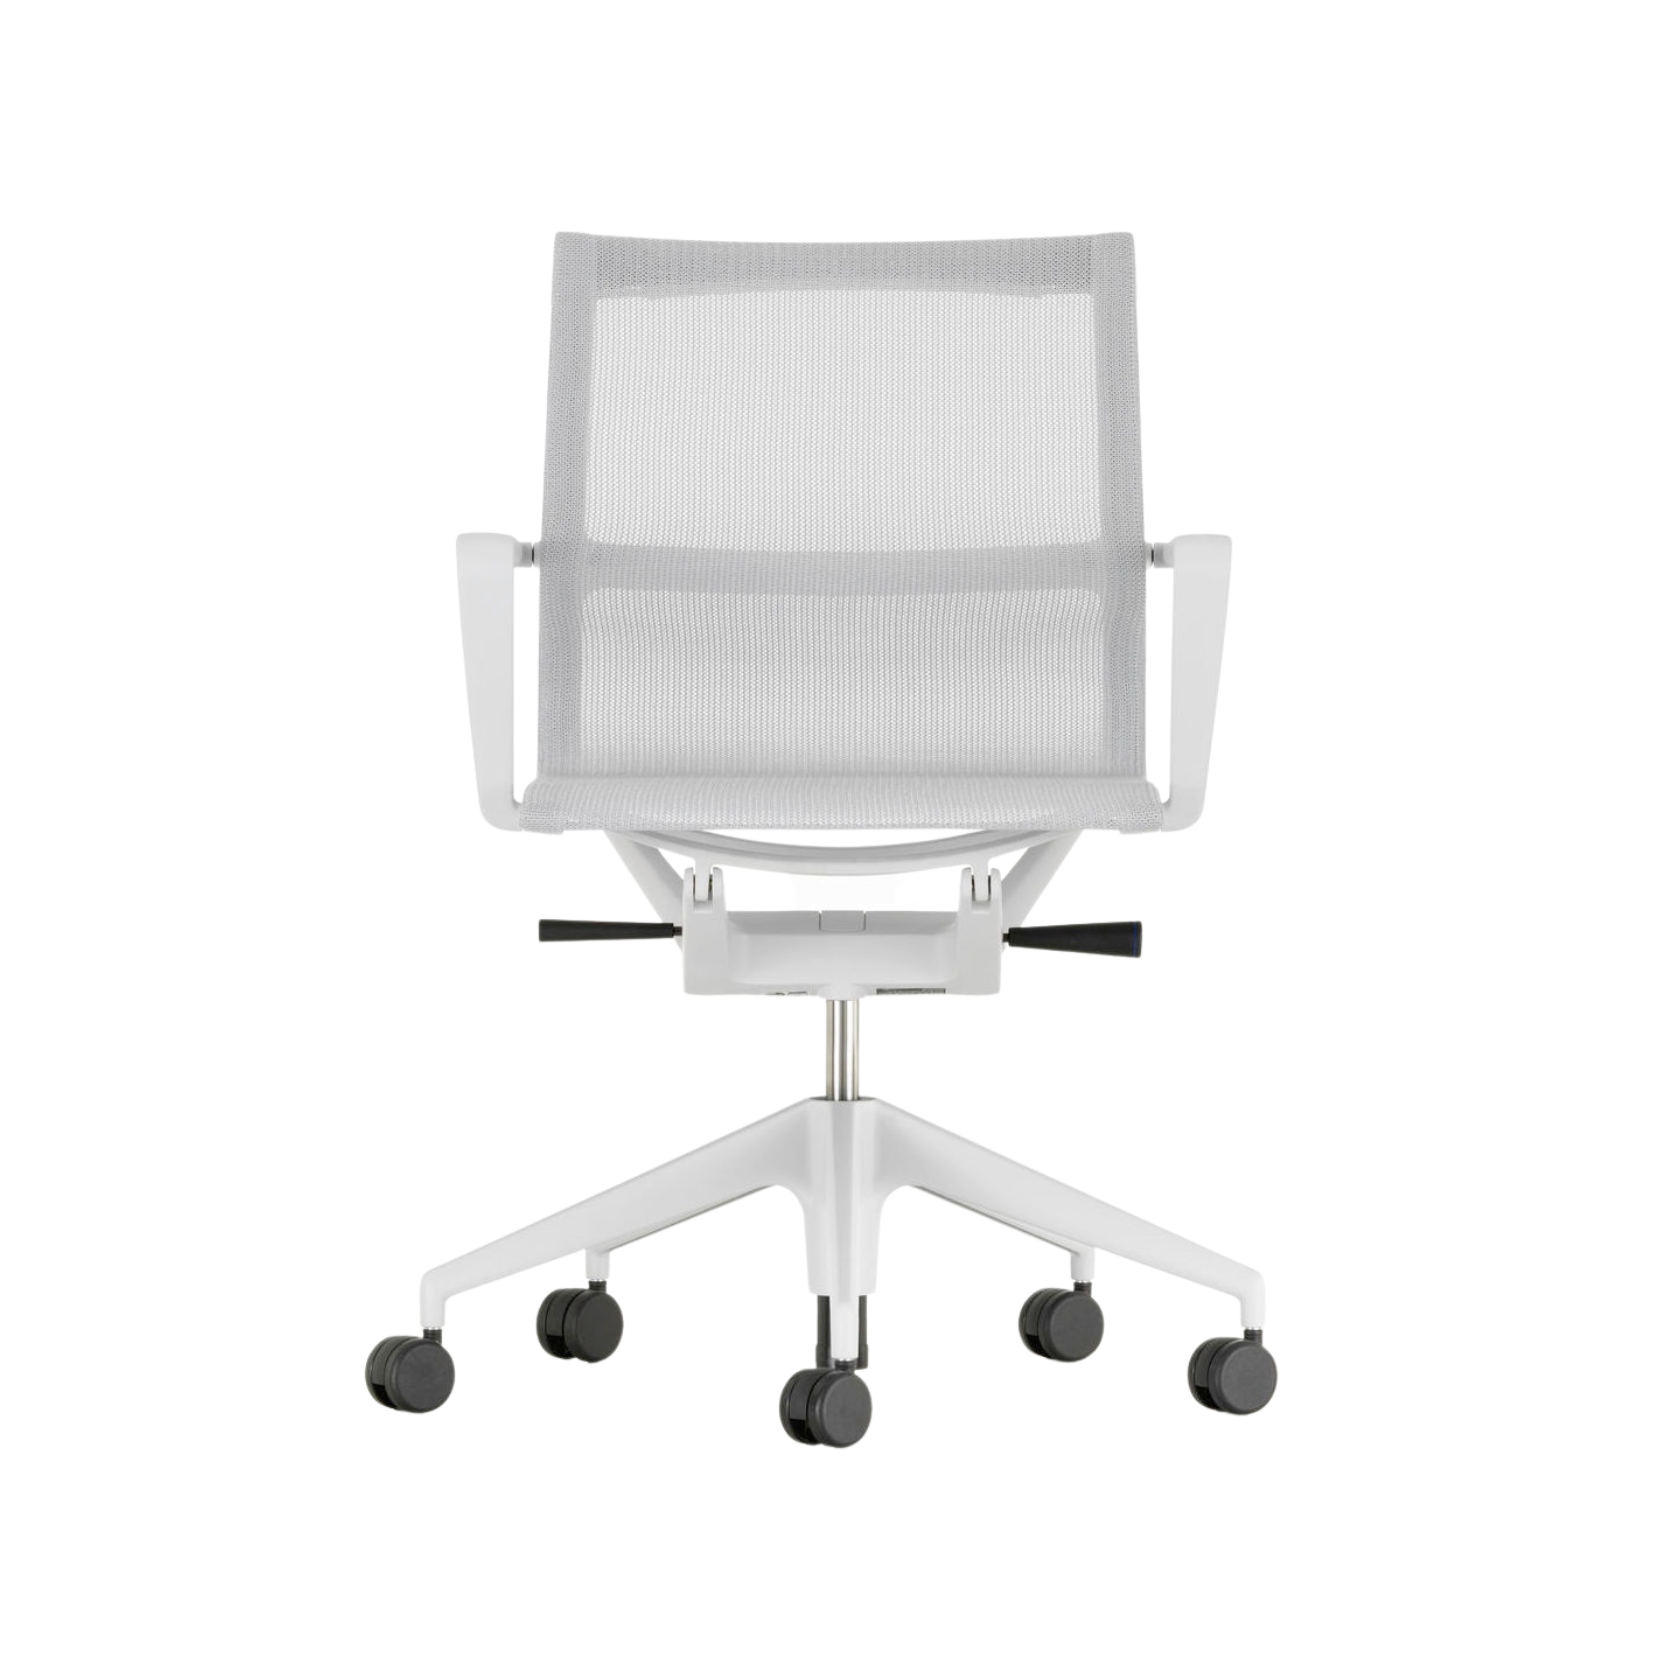 Vitra Physix - TrioKnit, Silver Office Chair Front